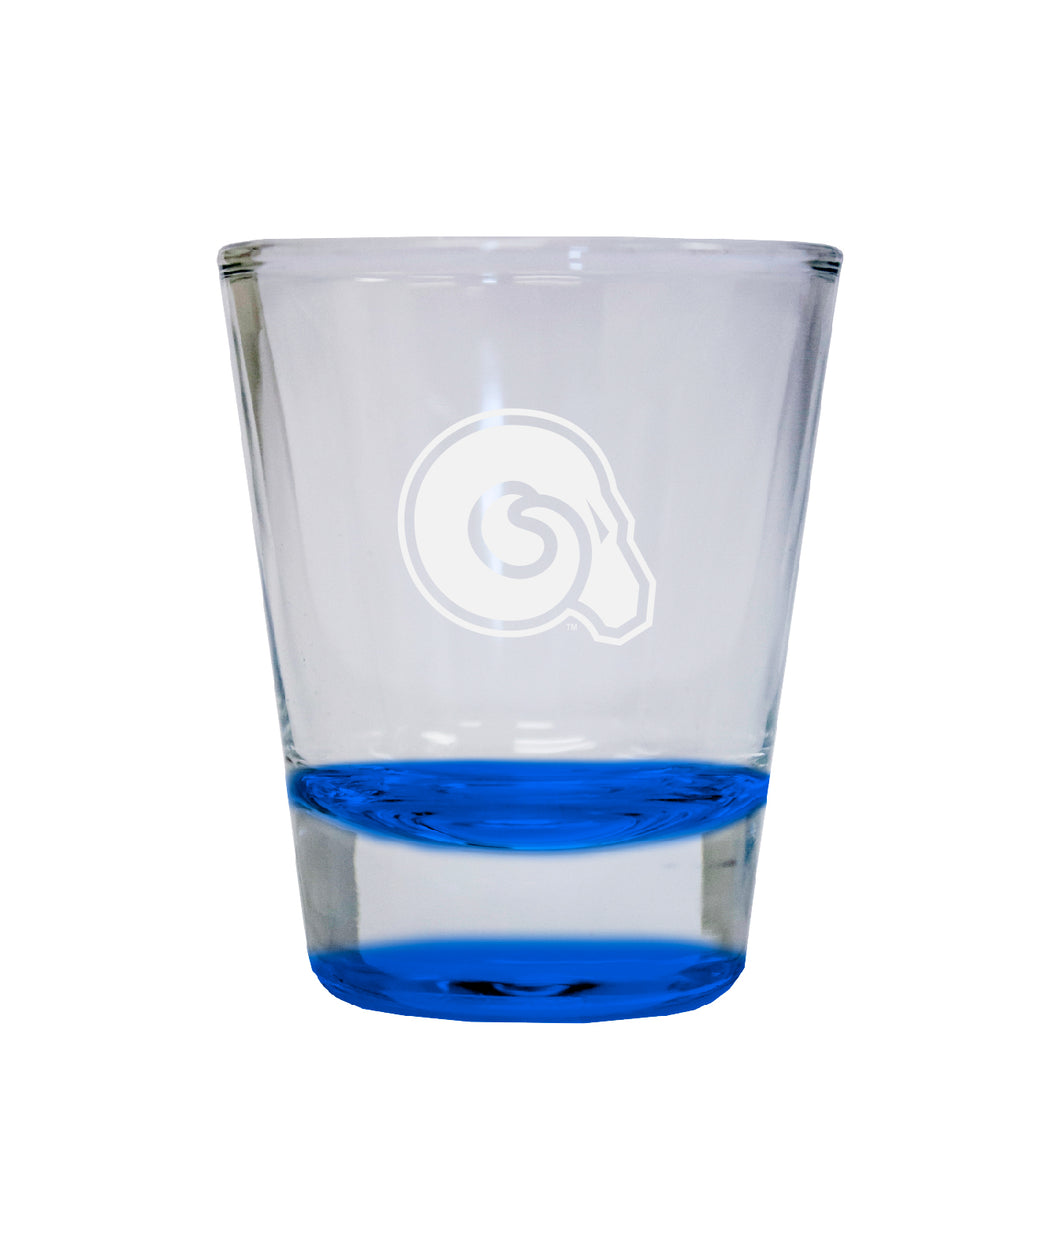 NCAA Albany State University Collector's 2oz Laser-Engraved Spirit Shot Glass Blue